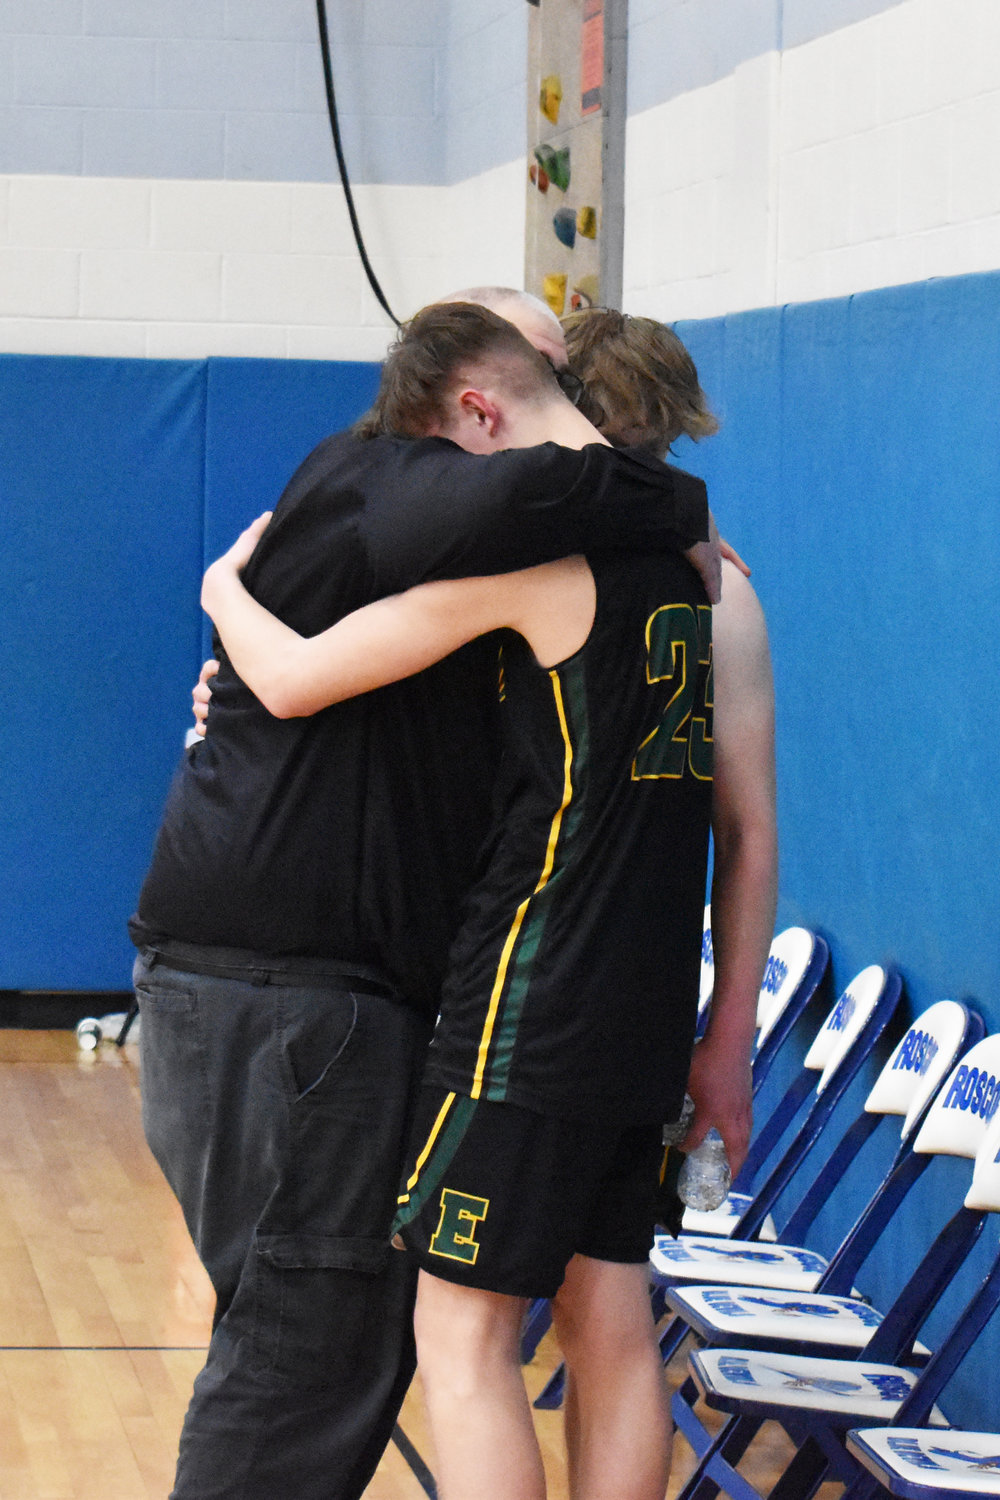 Coach Furler embraces his seniors, Frankie Whitmore and Sean Furler after their final high school season came to an end.